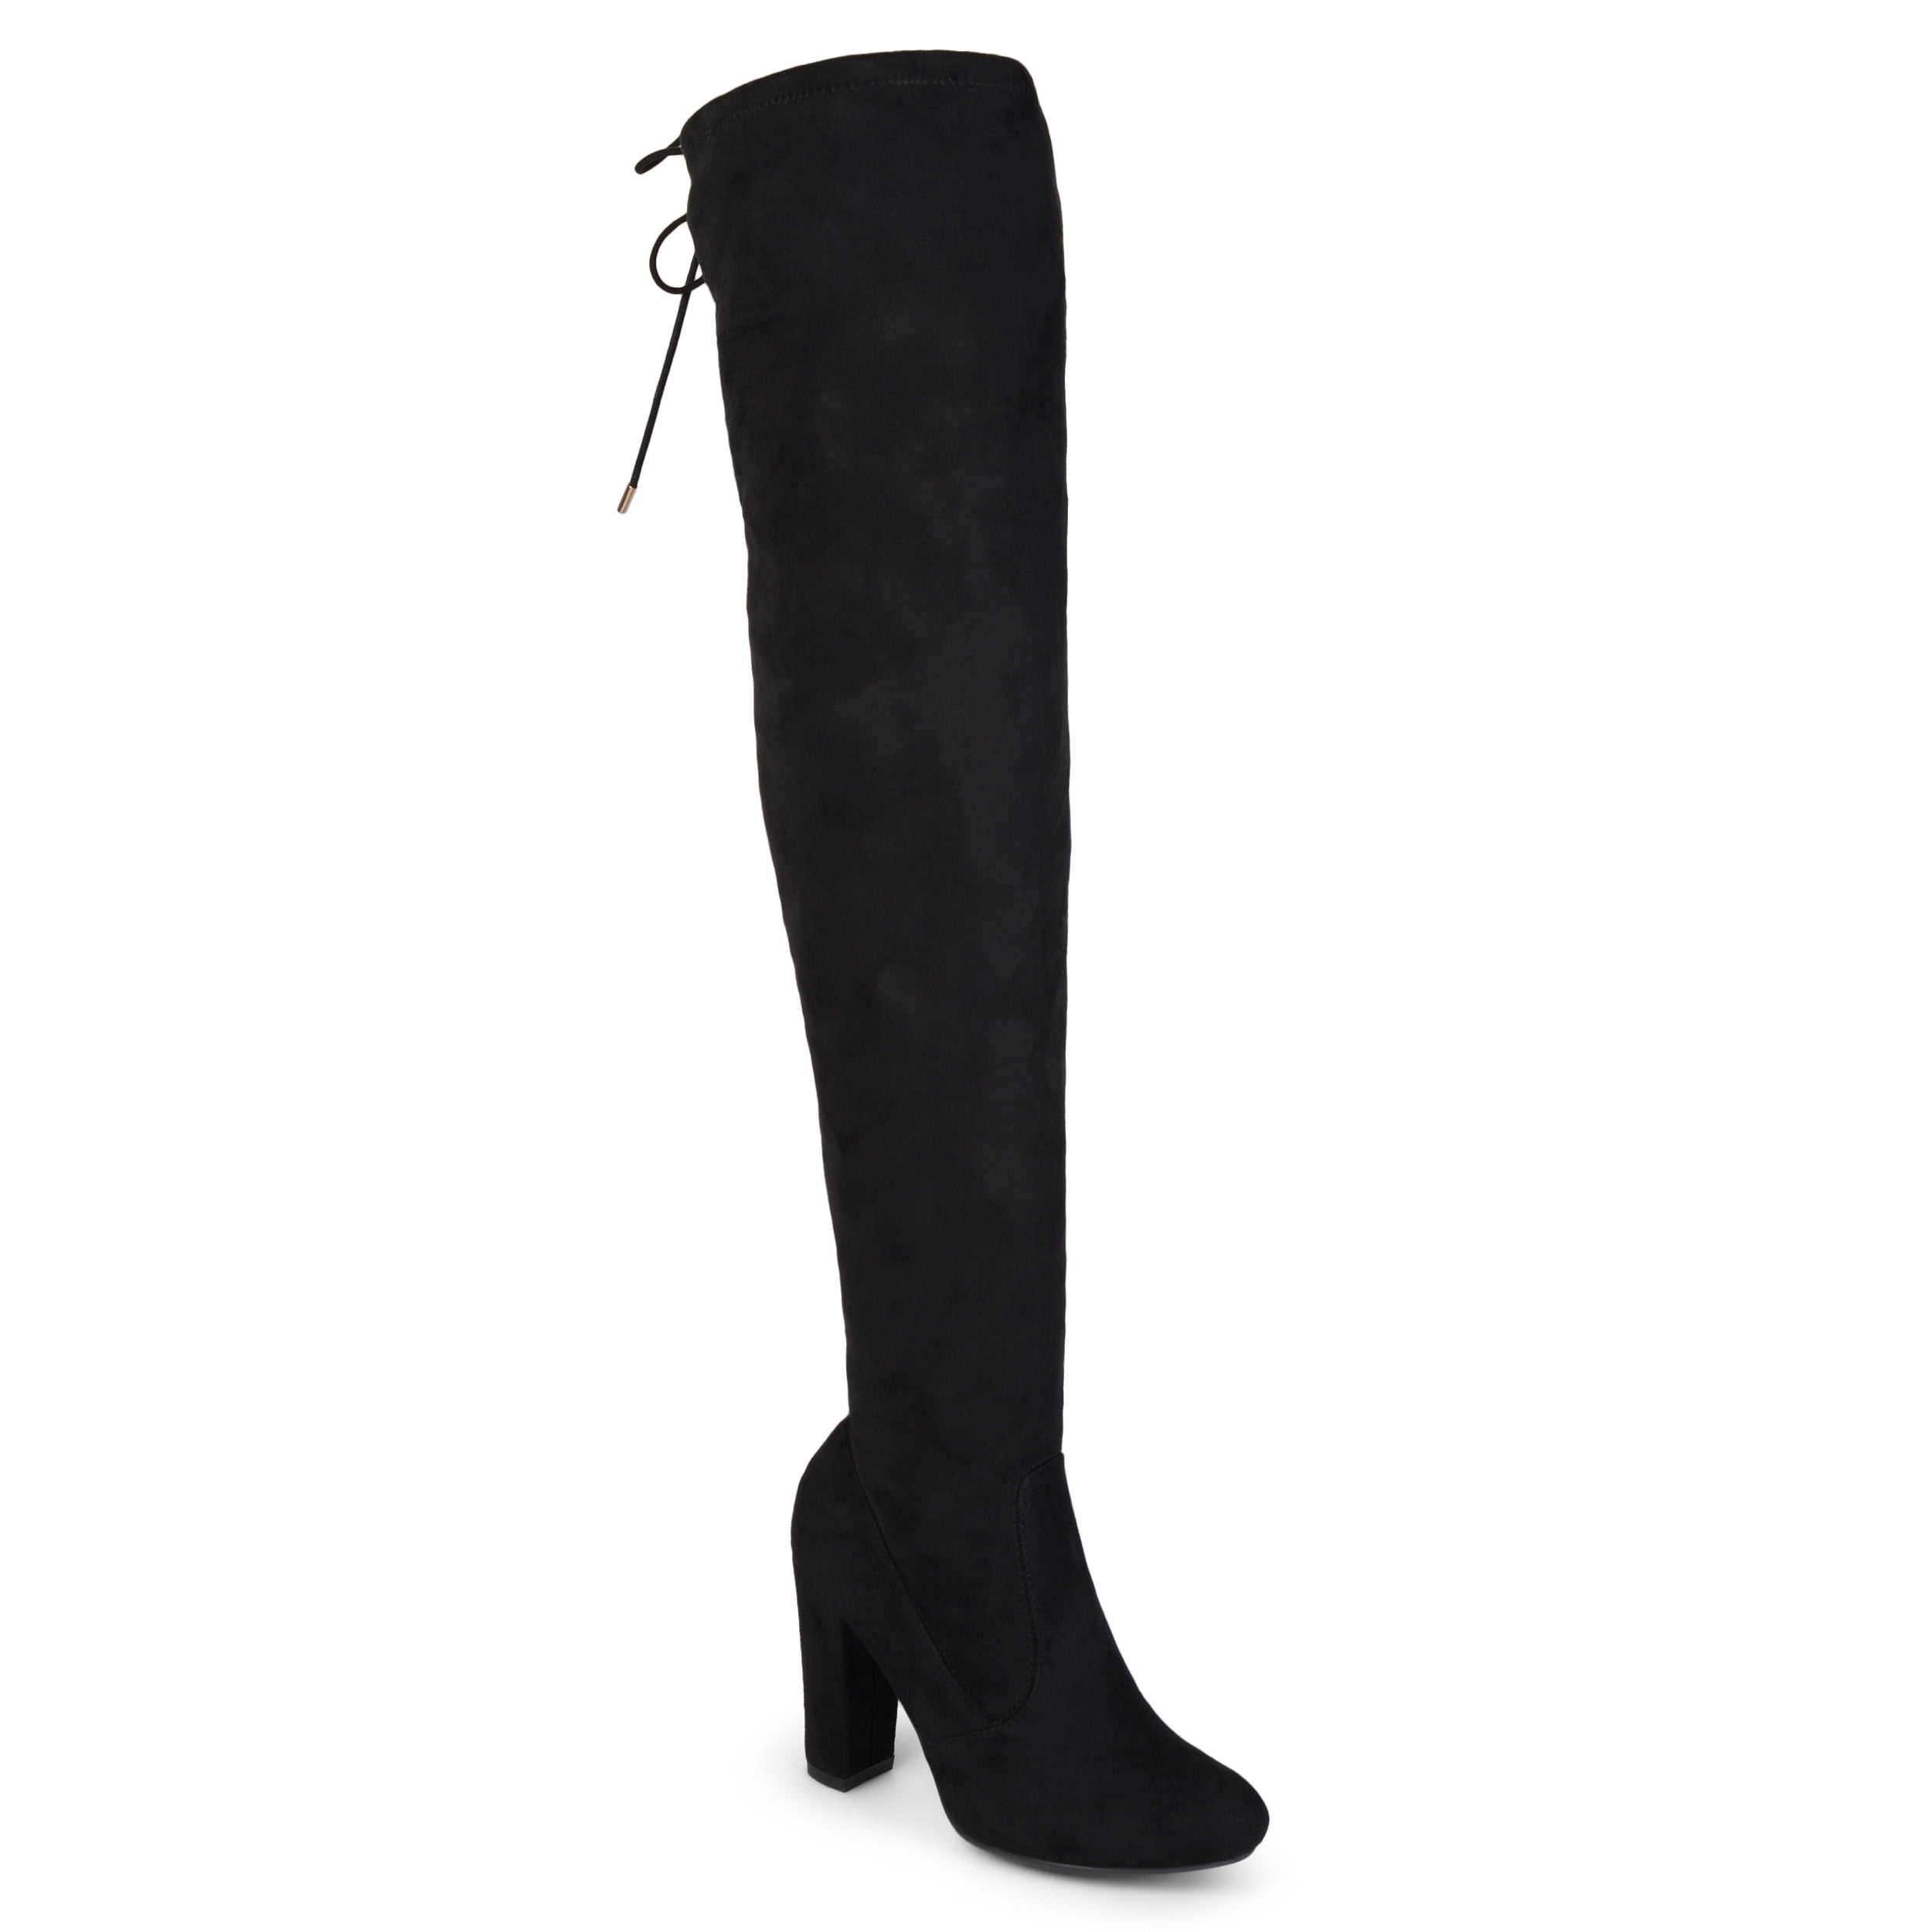 Mo Joc Women Over The Knee Stretch Boots with Low Chunky Heel